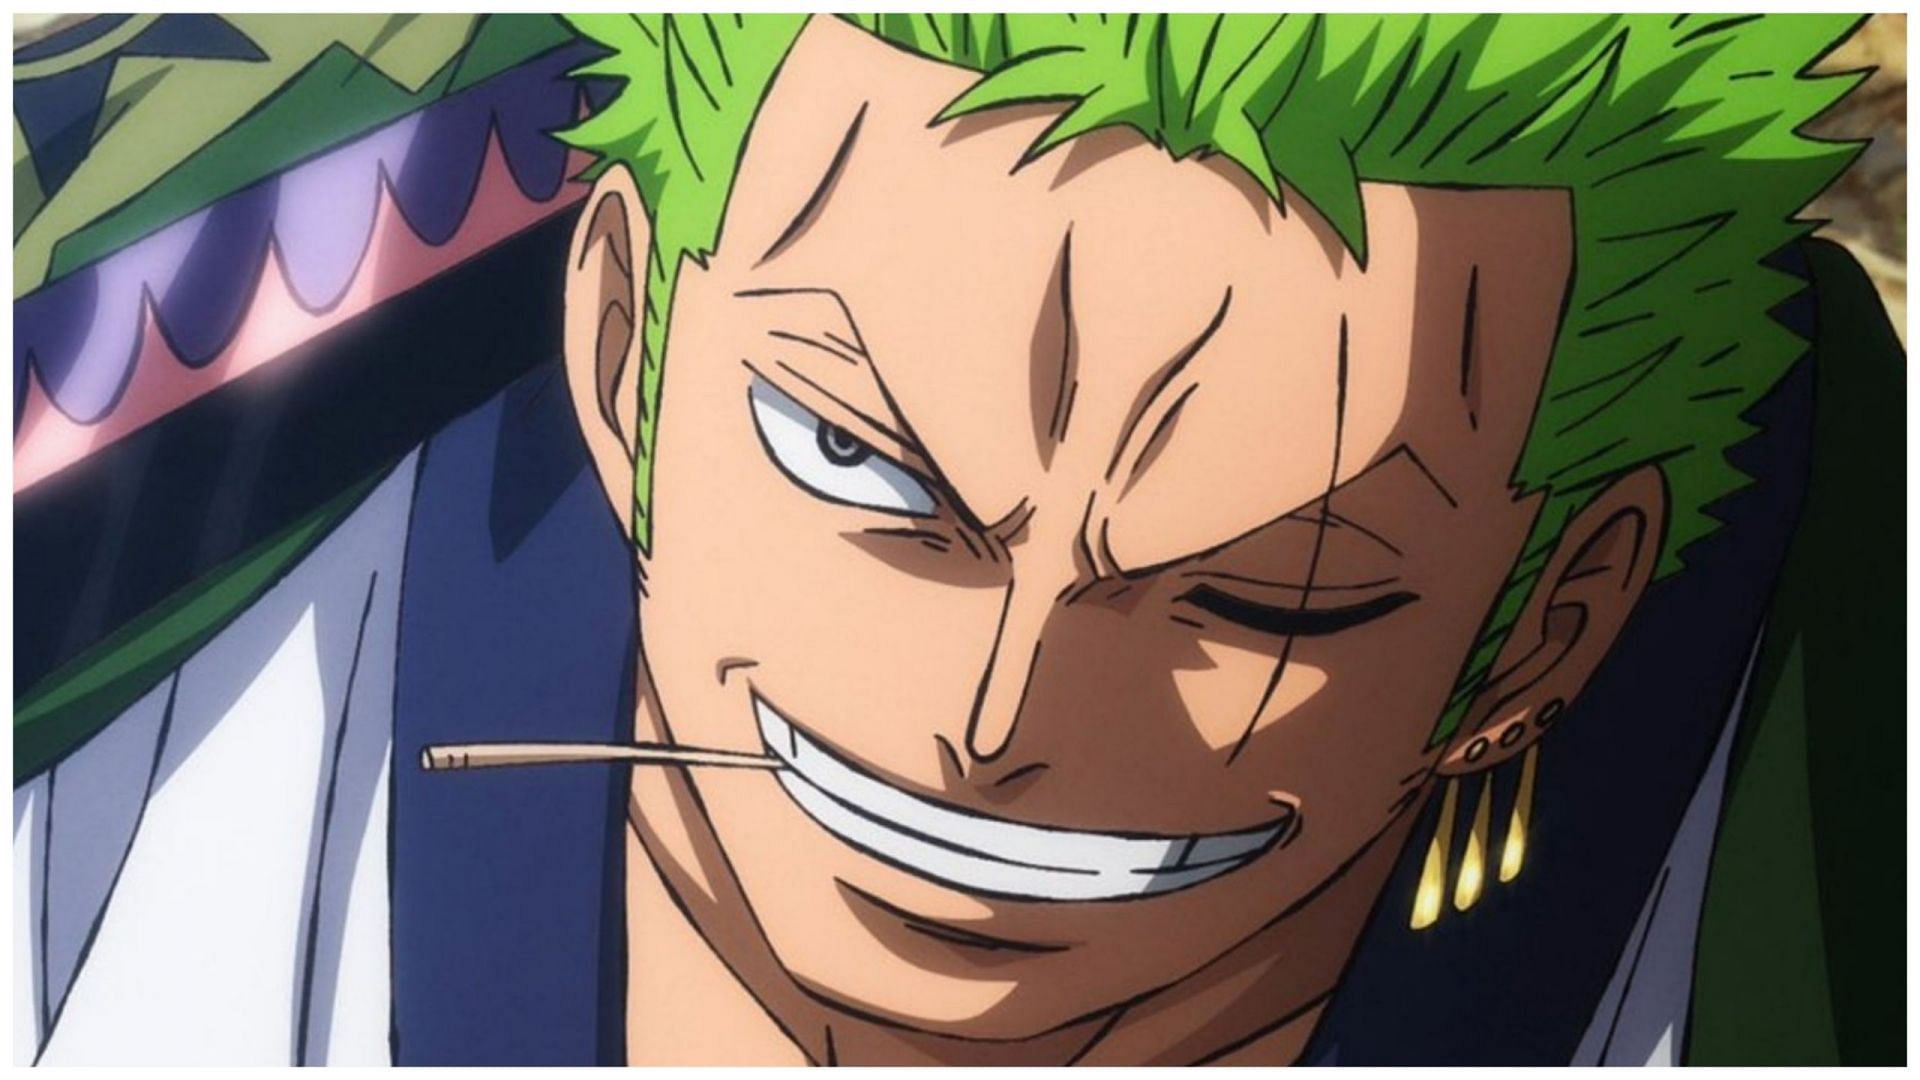 Revolutionary anime character from One Piece (Image via Toei Animation)